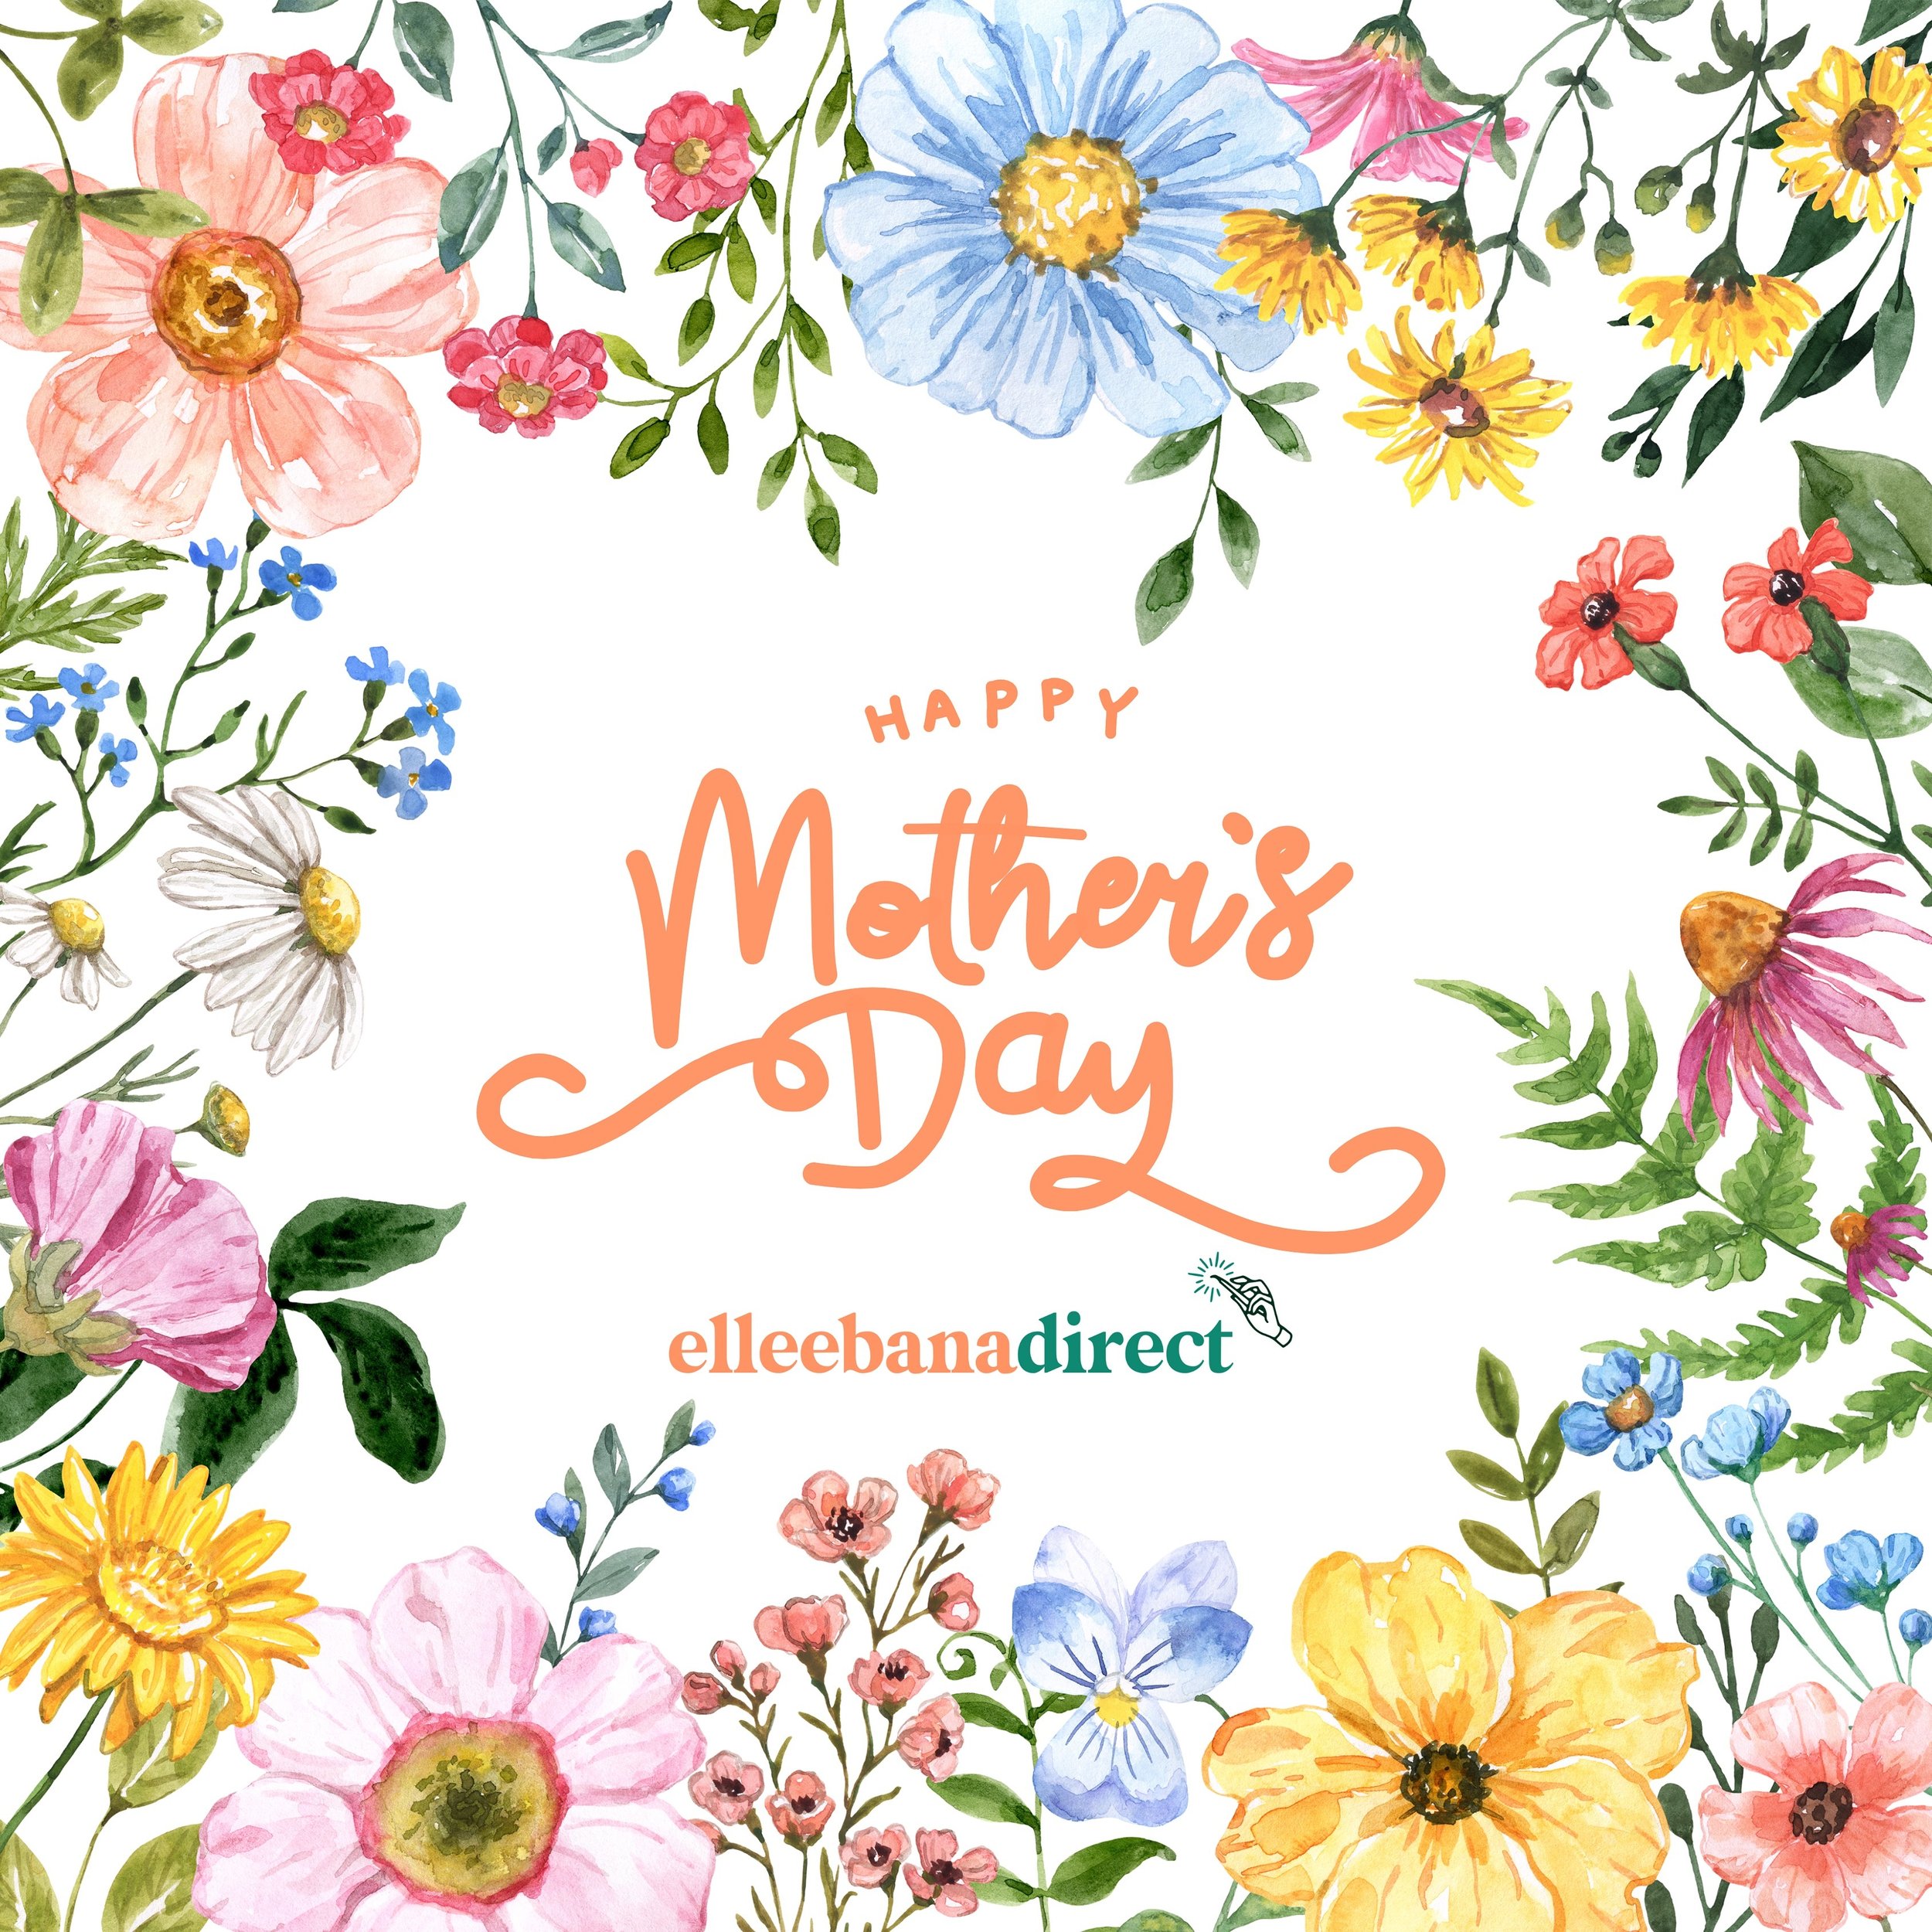 We have a special place in our hearts for all of you mothers. You make the world go round. All of our love, Laura and Dayna. Oxox #wildbloombeauty #beautysupply #elleebanadirect #motherappreciationpost #mothersday